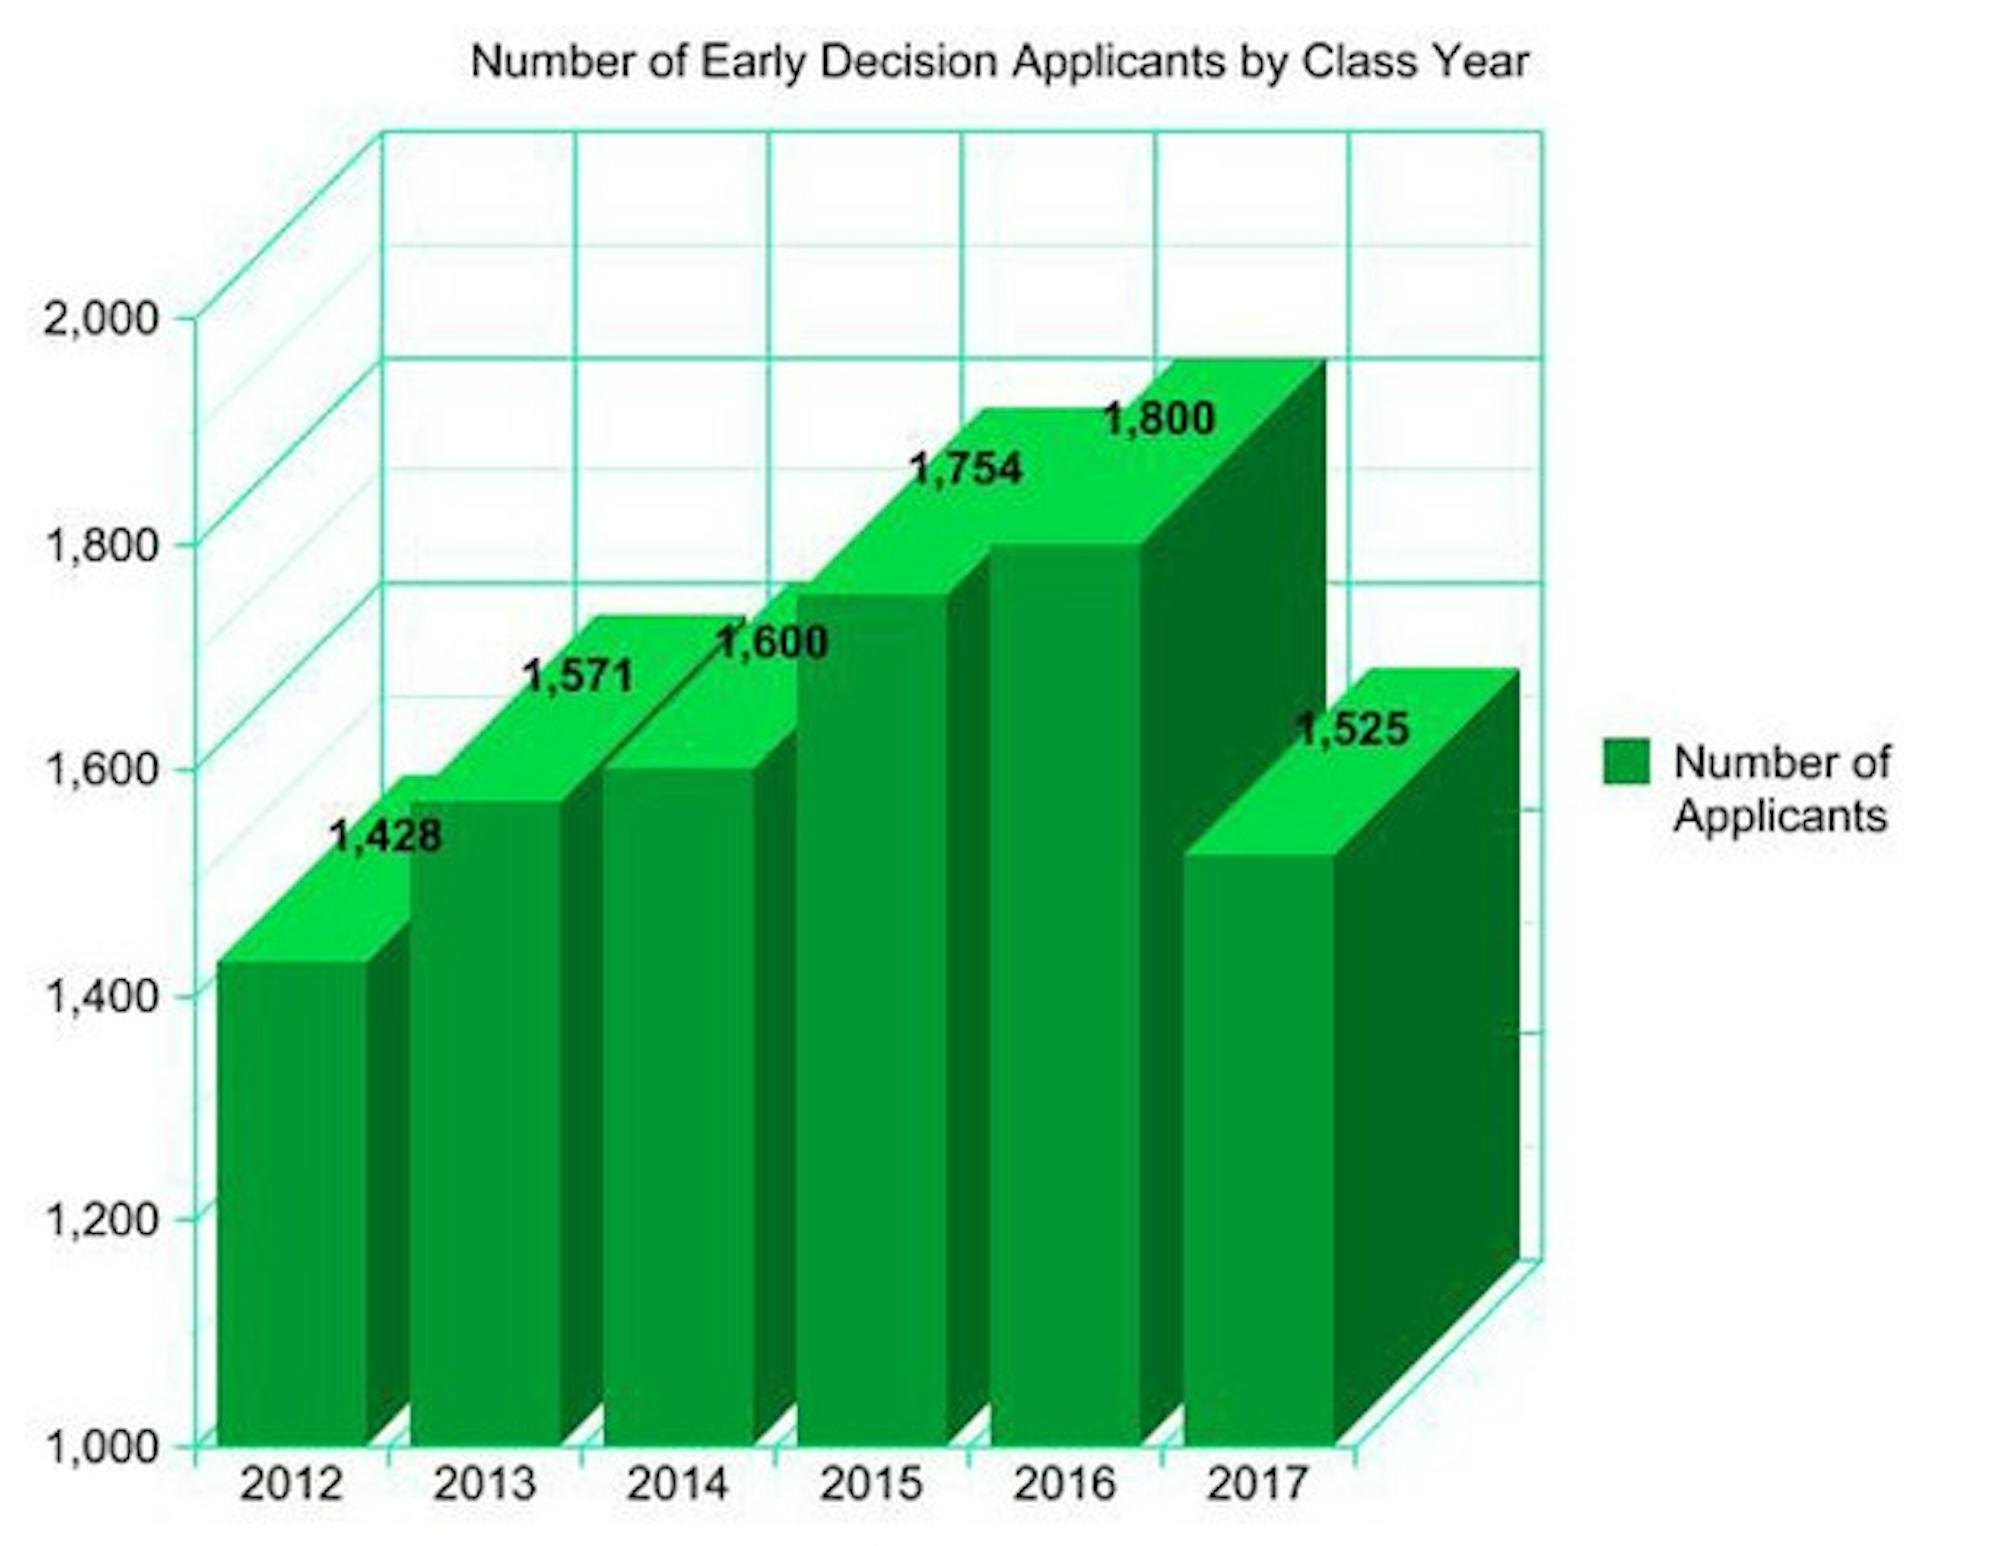 The number of early decision applications for the Class of 2017 declined for the first time in several years for undetermined reasons.